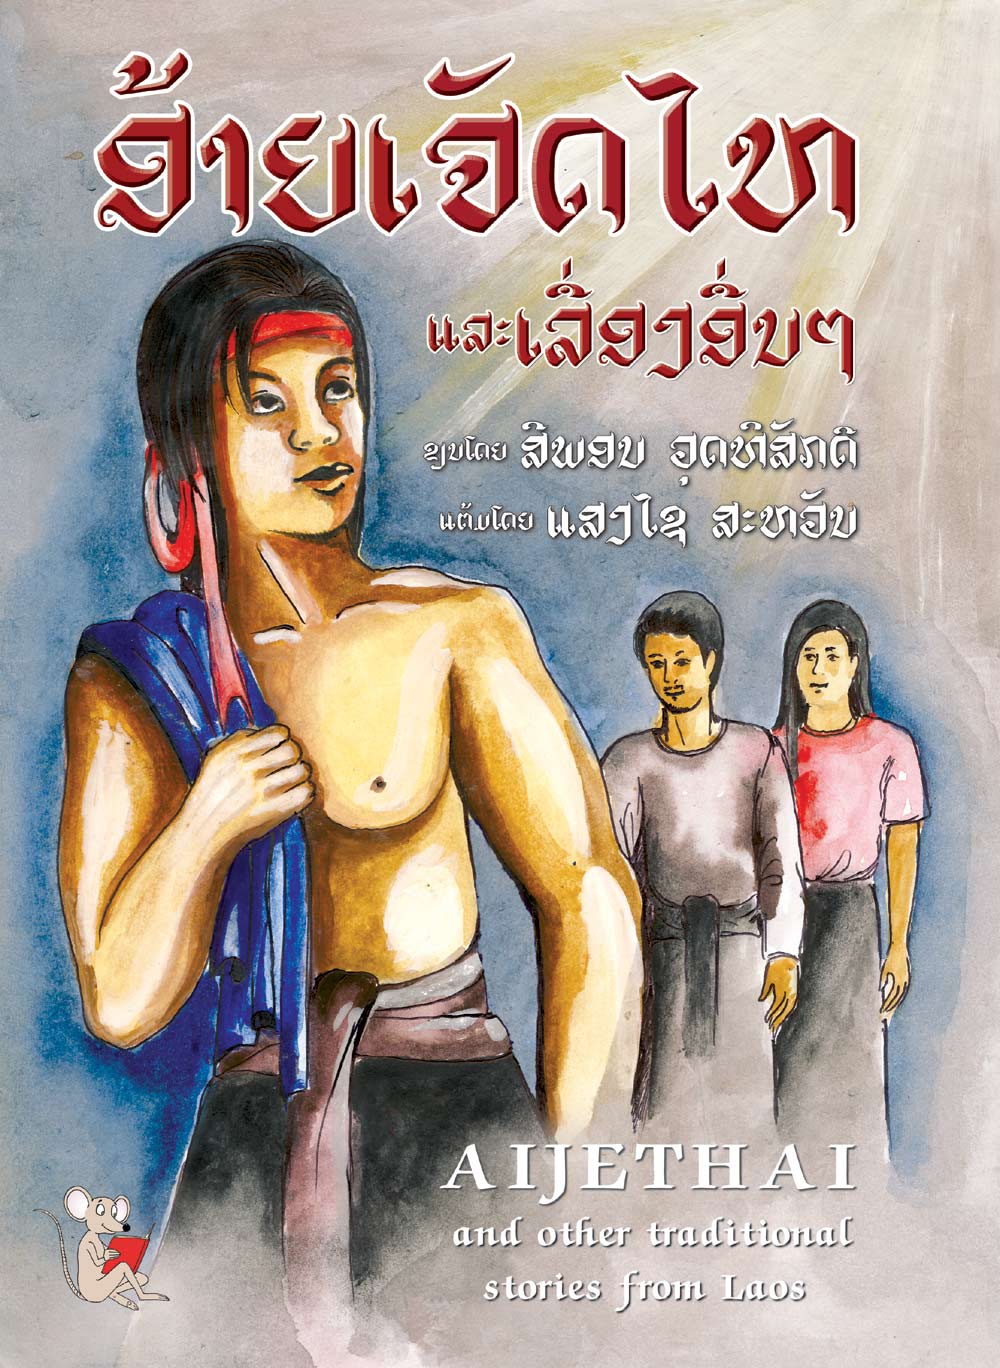 Aijethai and other traditional stories from Laos large book cover, published in Lao and English